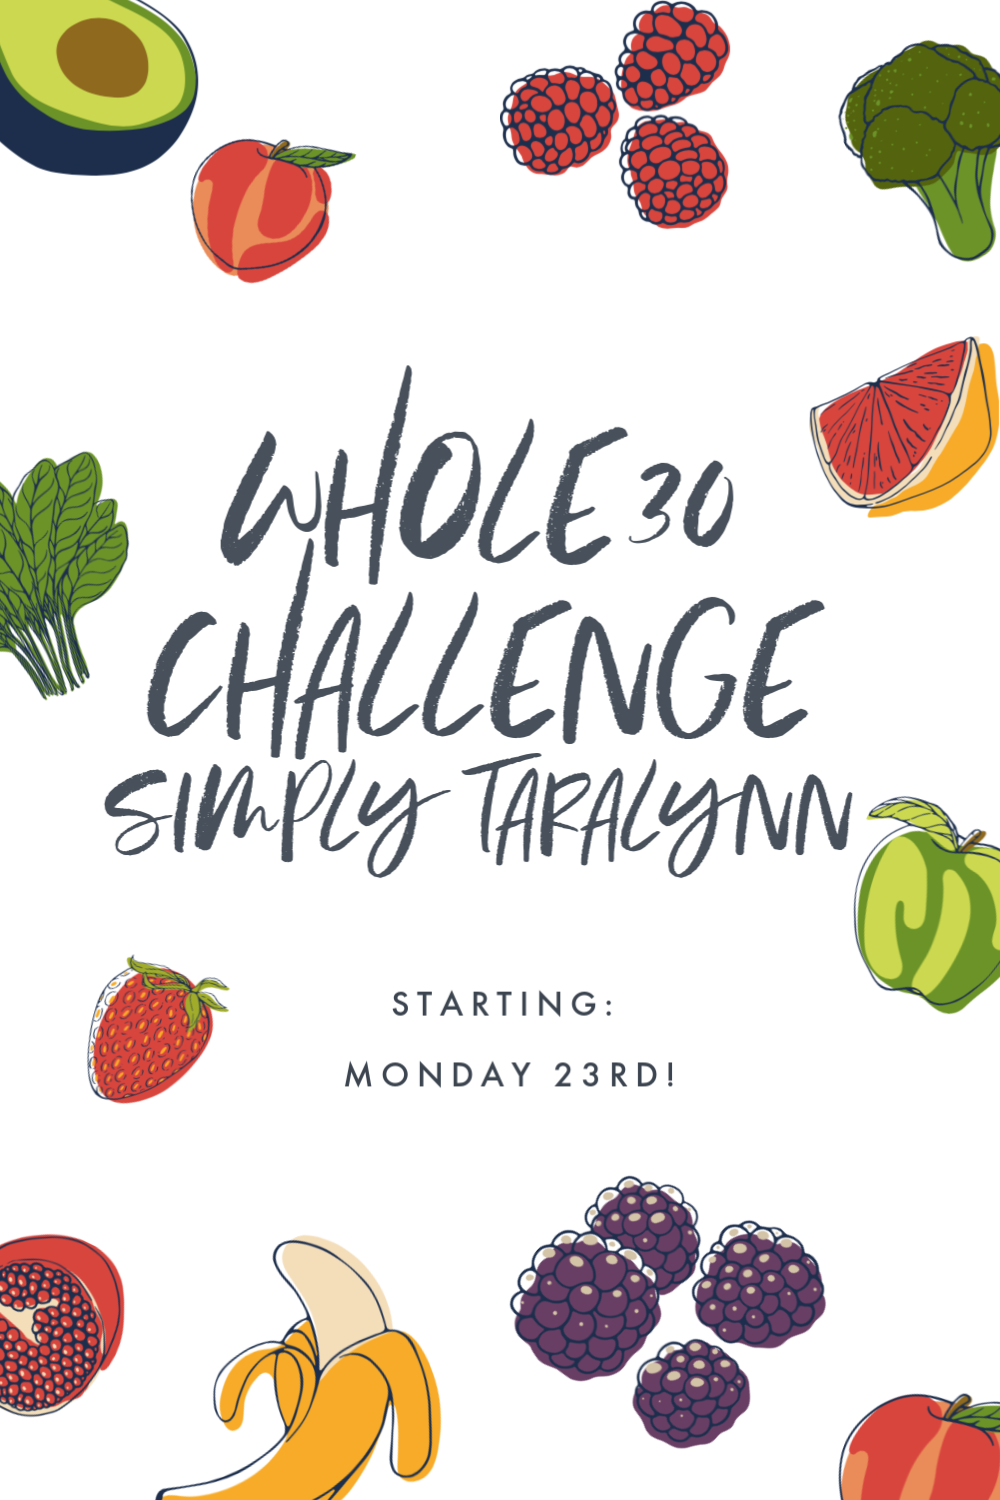 whole30, whole 30, challenge, simply taralynn, whole30 challenge